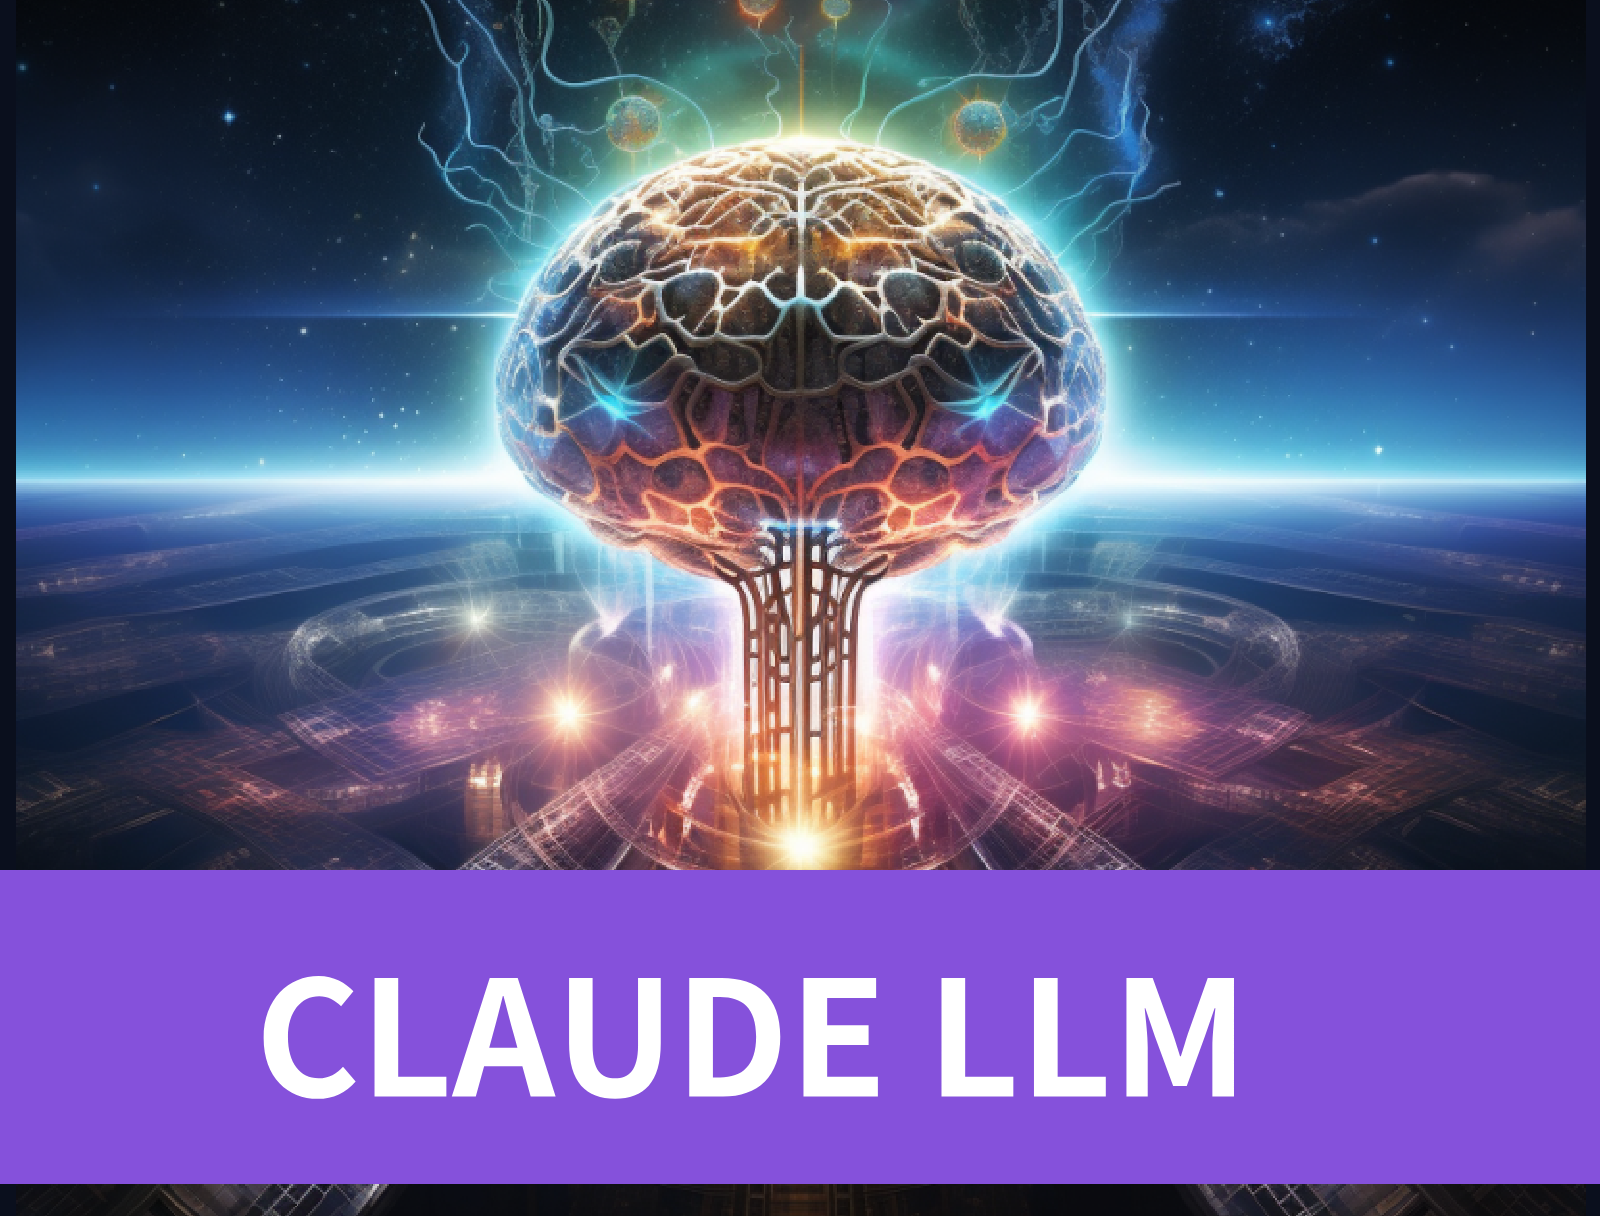 Claude LLM - Pros and Cons Compared with Other LLMs